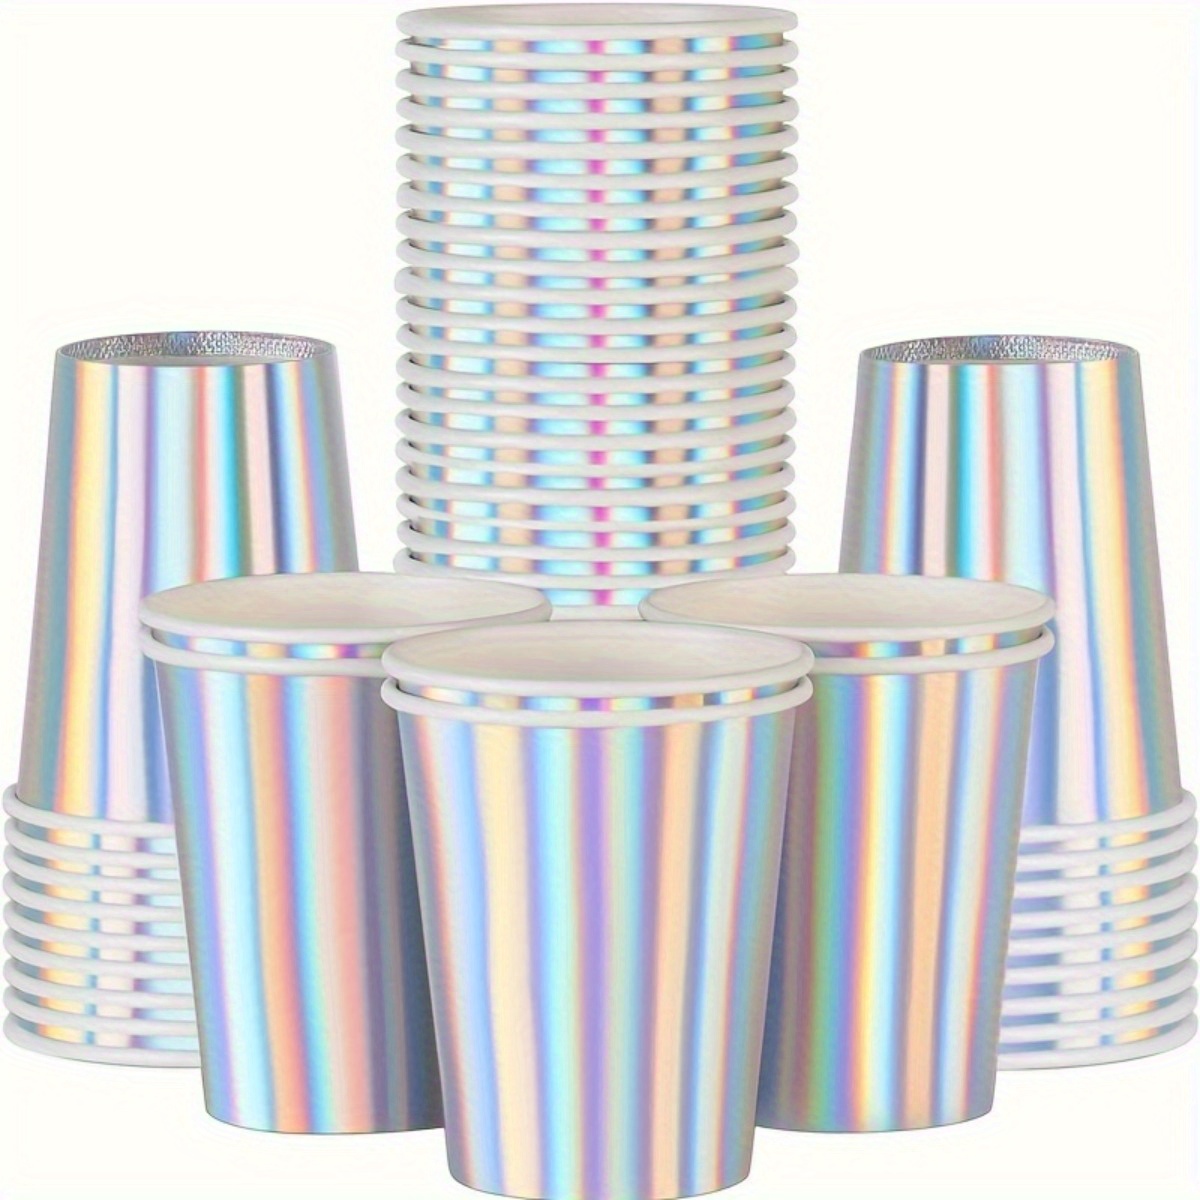 

25-pack Iridescent Rainbow Disposable Cups For Hot & Cold Drinks - Perfect For Parties, Birthdays, Weddings & Picnics